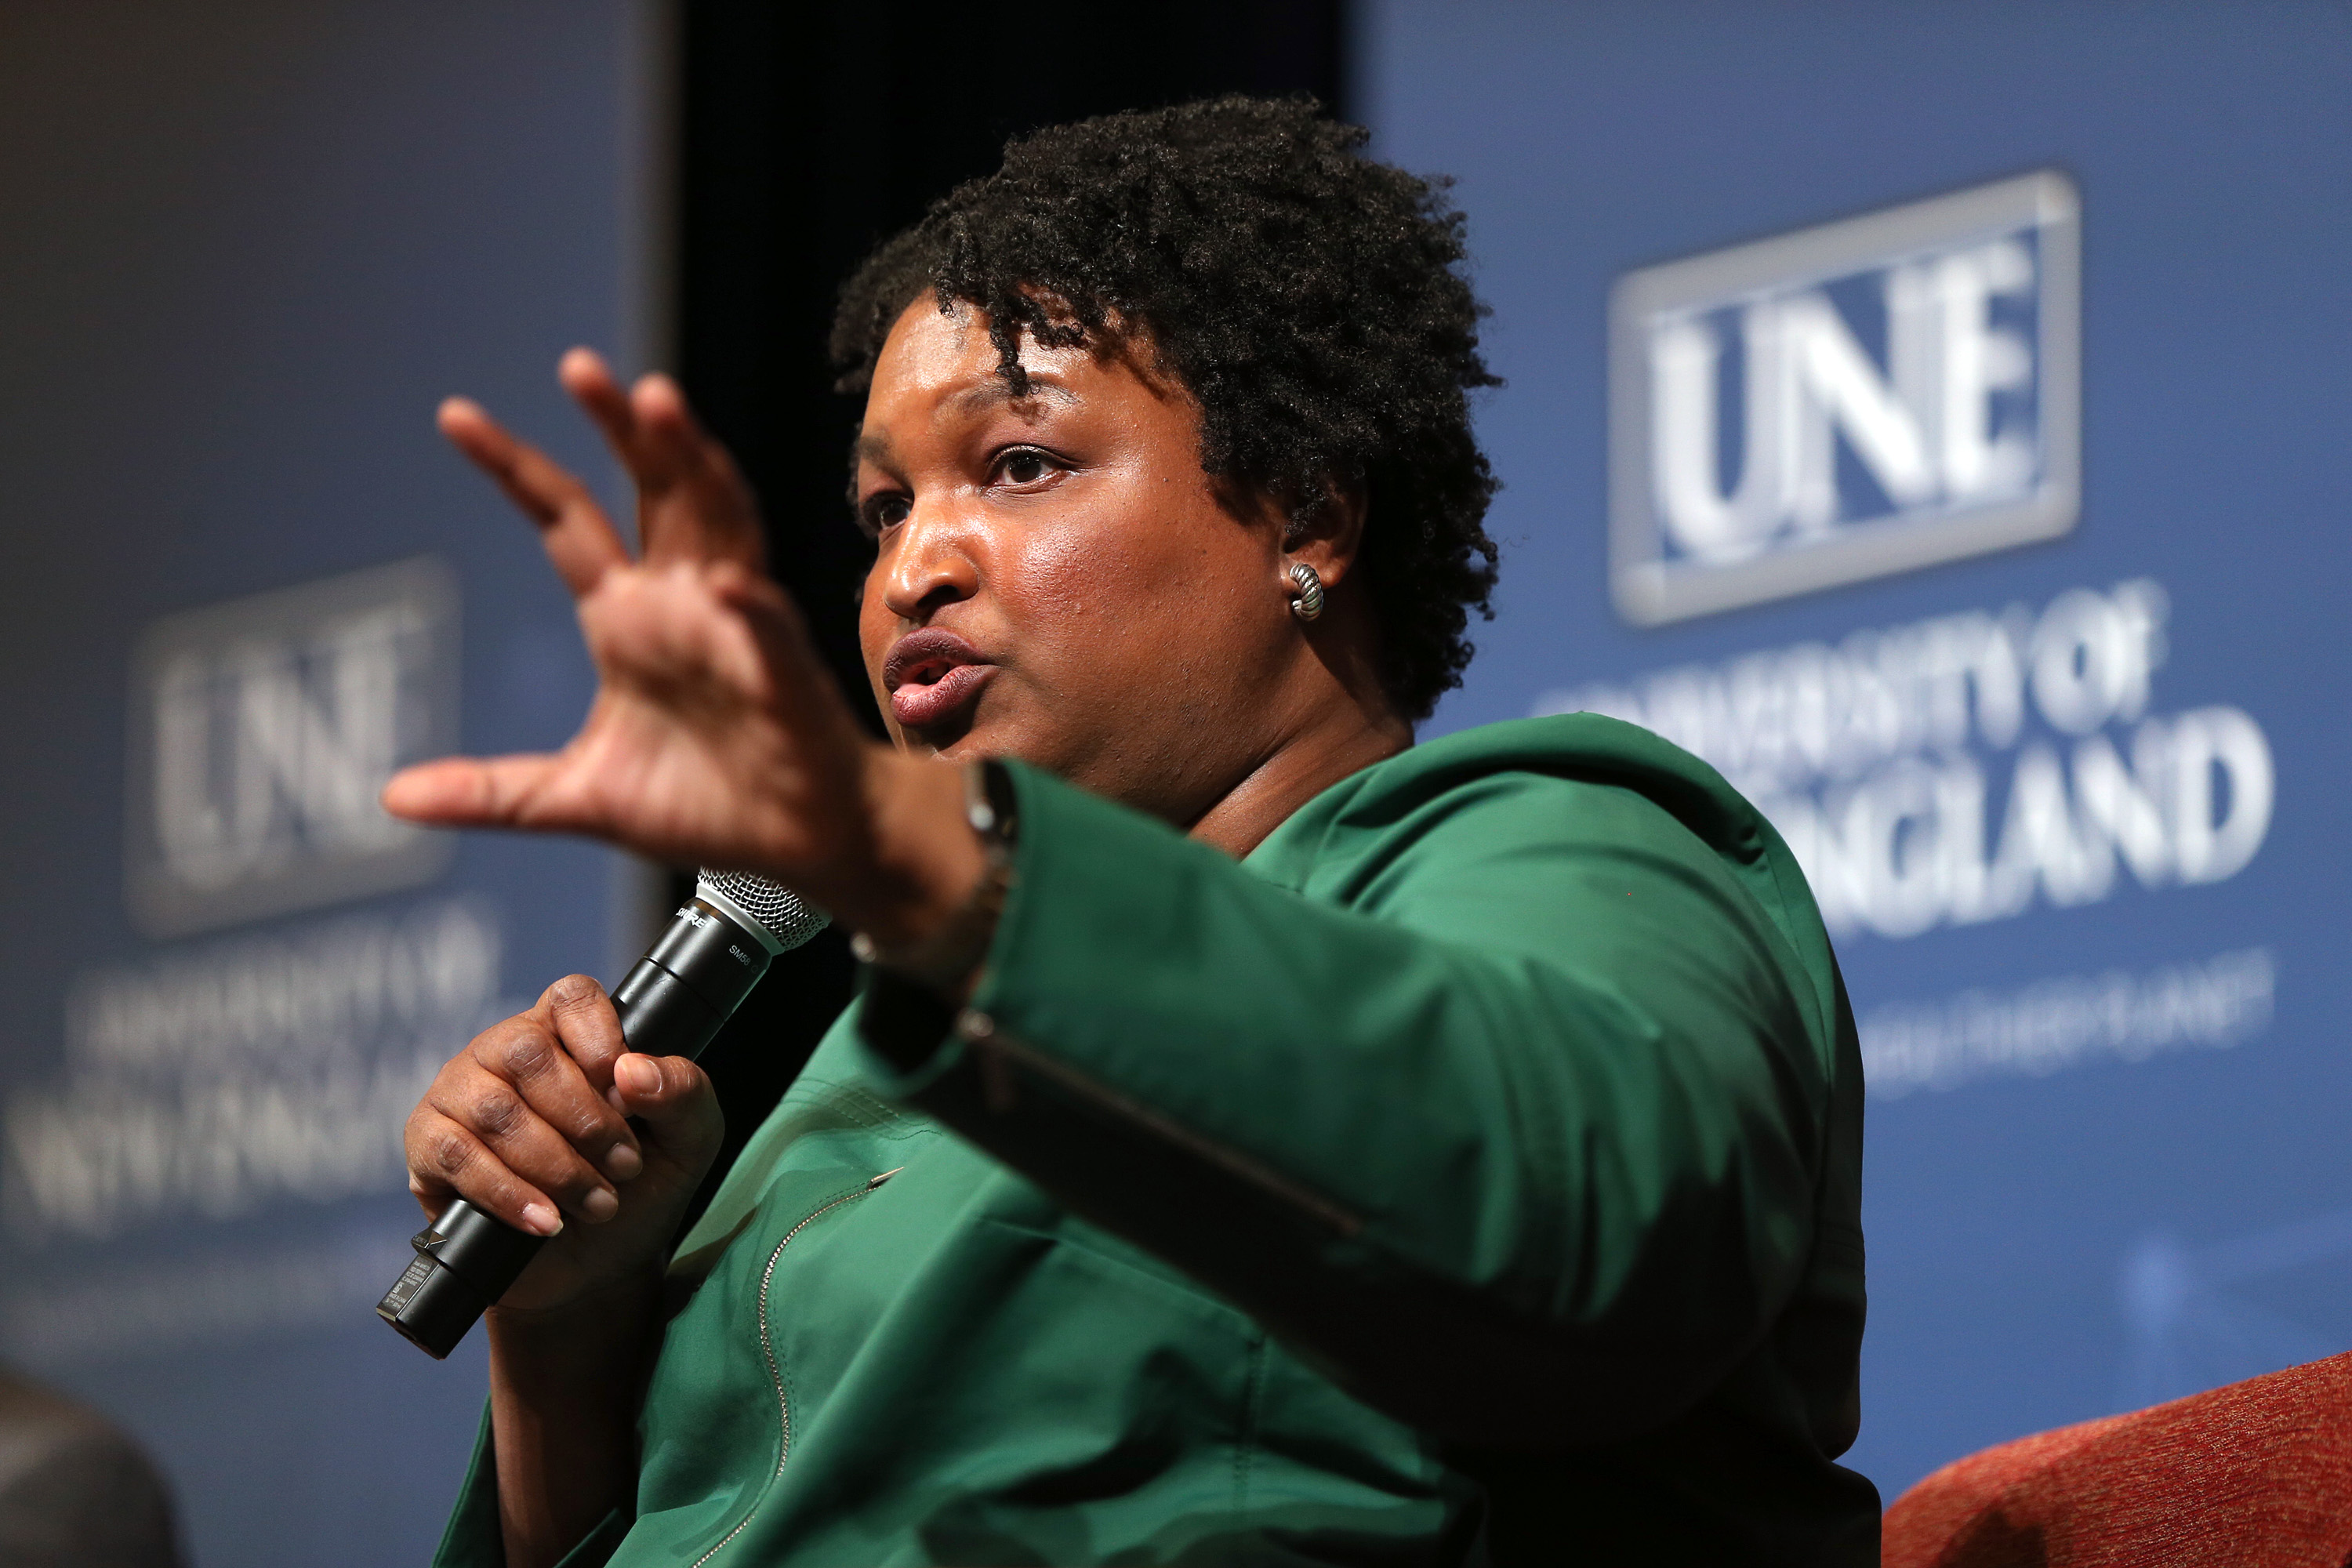 Stacey Abrams, the 2018 Georgia Democratic gubernatorial candidate, speaking in Portland, Maine in January 2020. (Ben McCanna—Portland Press Herald/Getty Images)